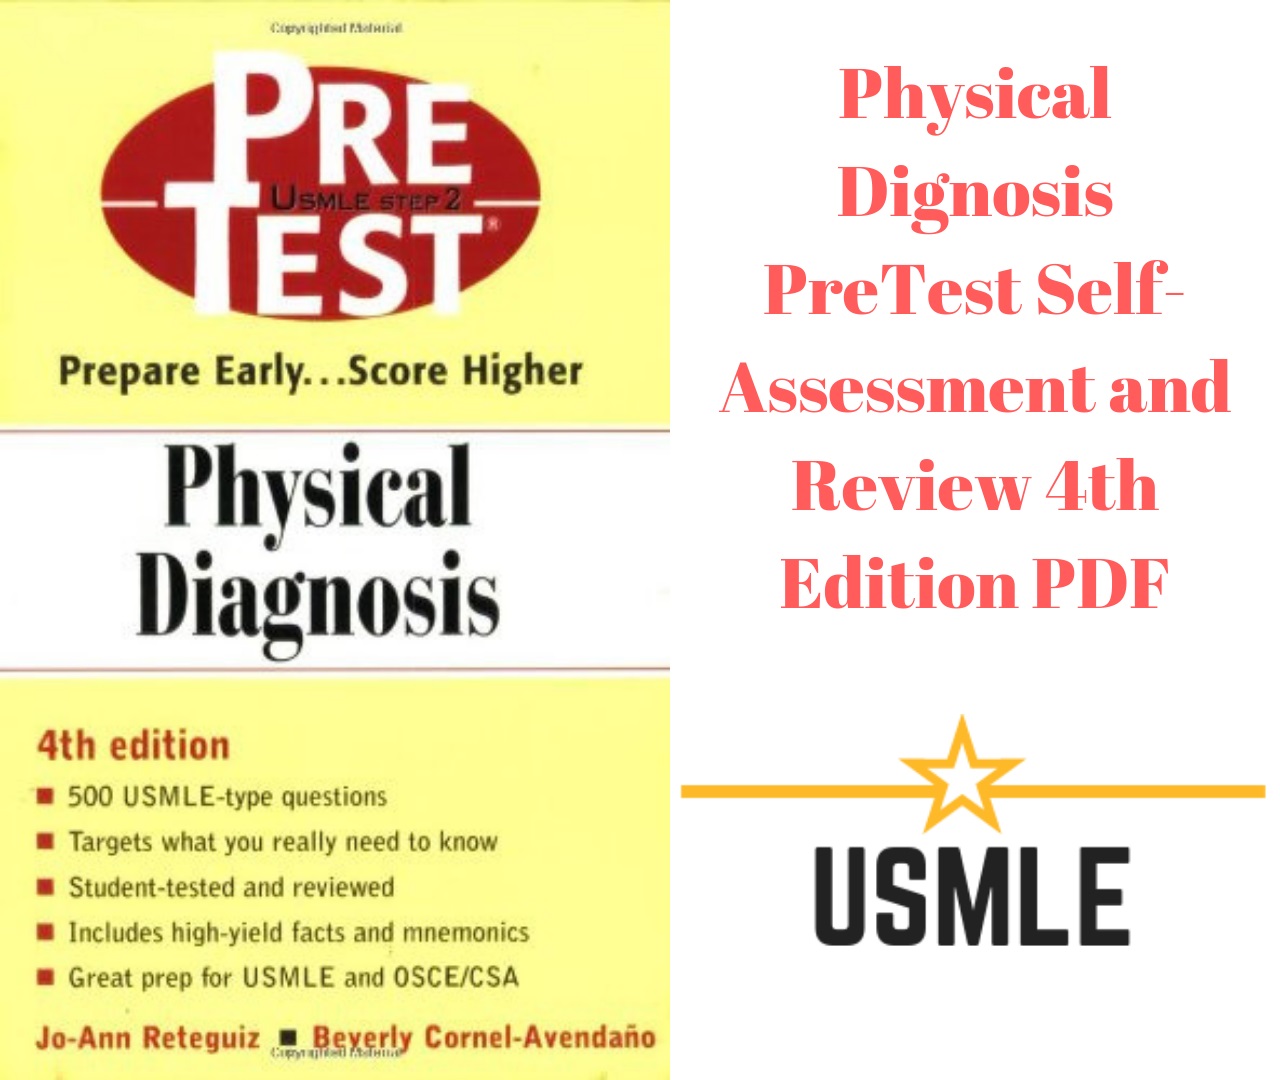 Physical Diagnosis PreTest Self-Assessment and Review 4th Edition